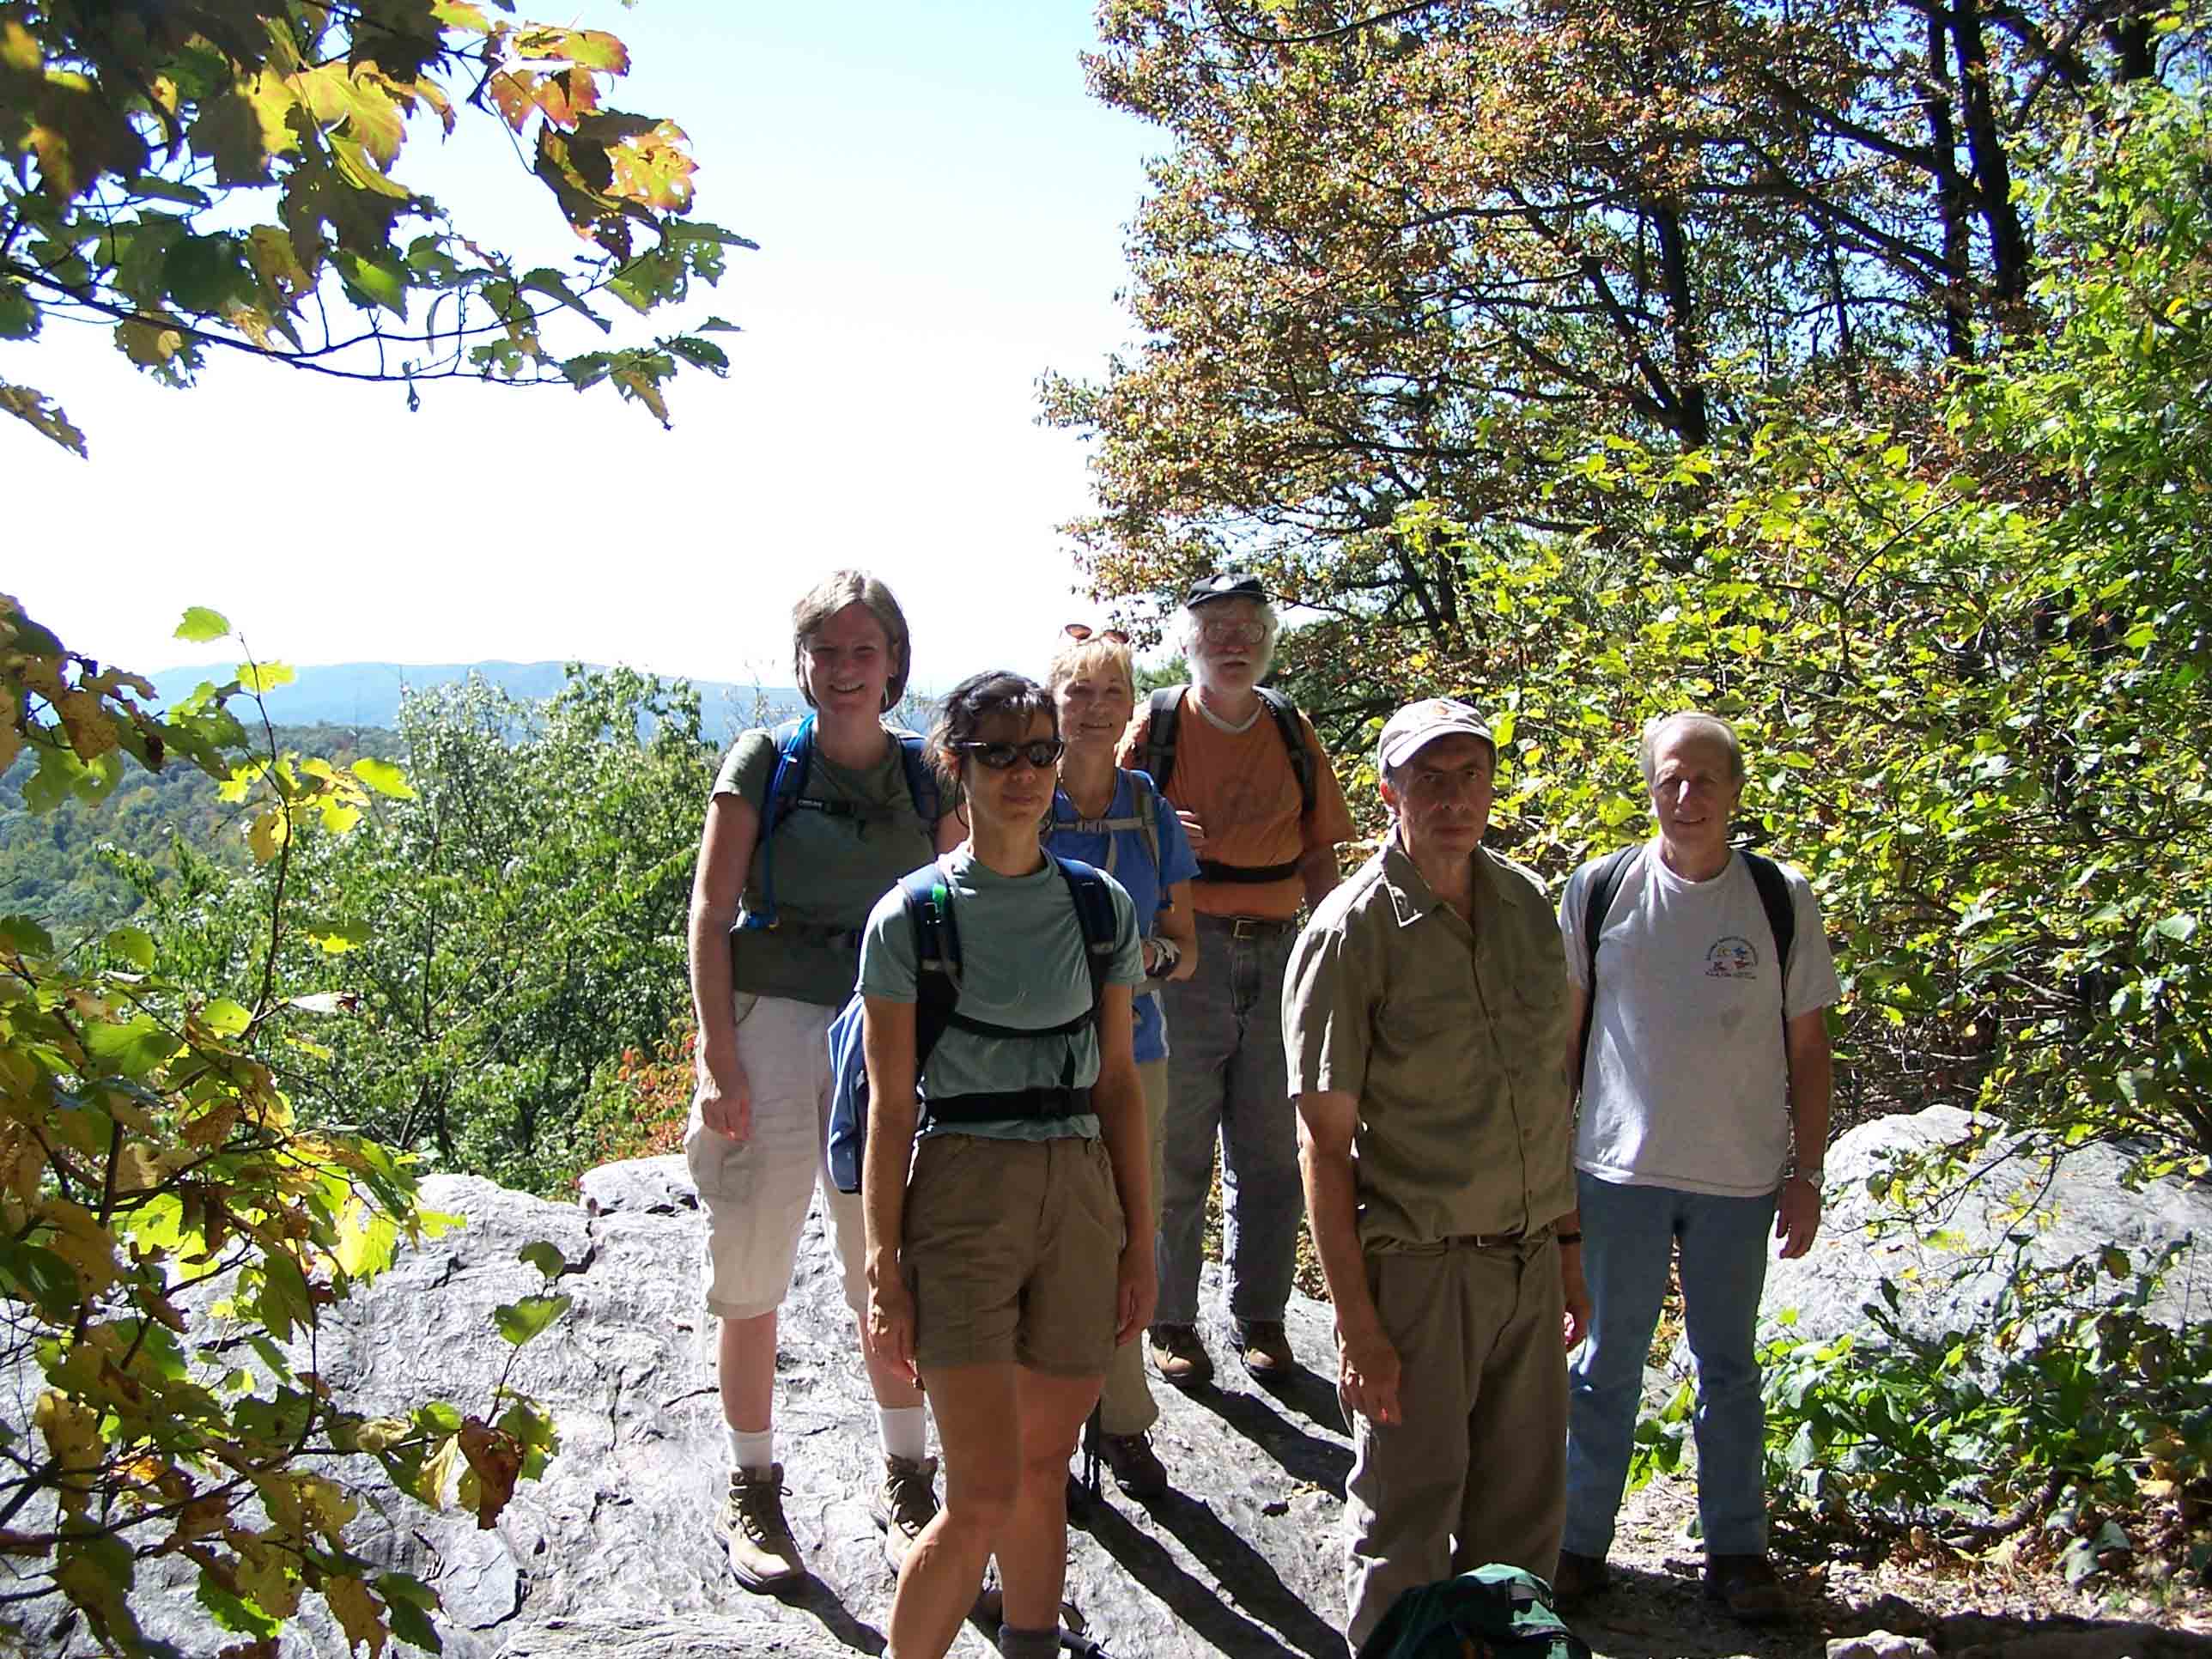 mm 3.8 - Mountain Club of Maryland at White Rocks Viewpoint. Courtesy at@rohland.org